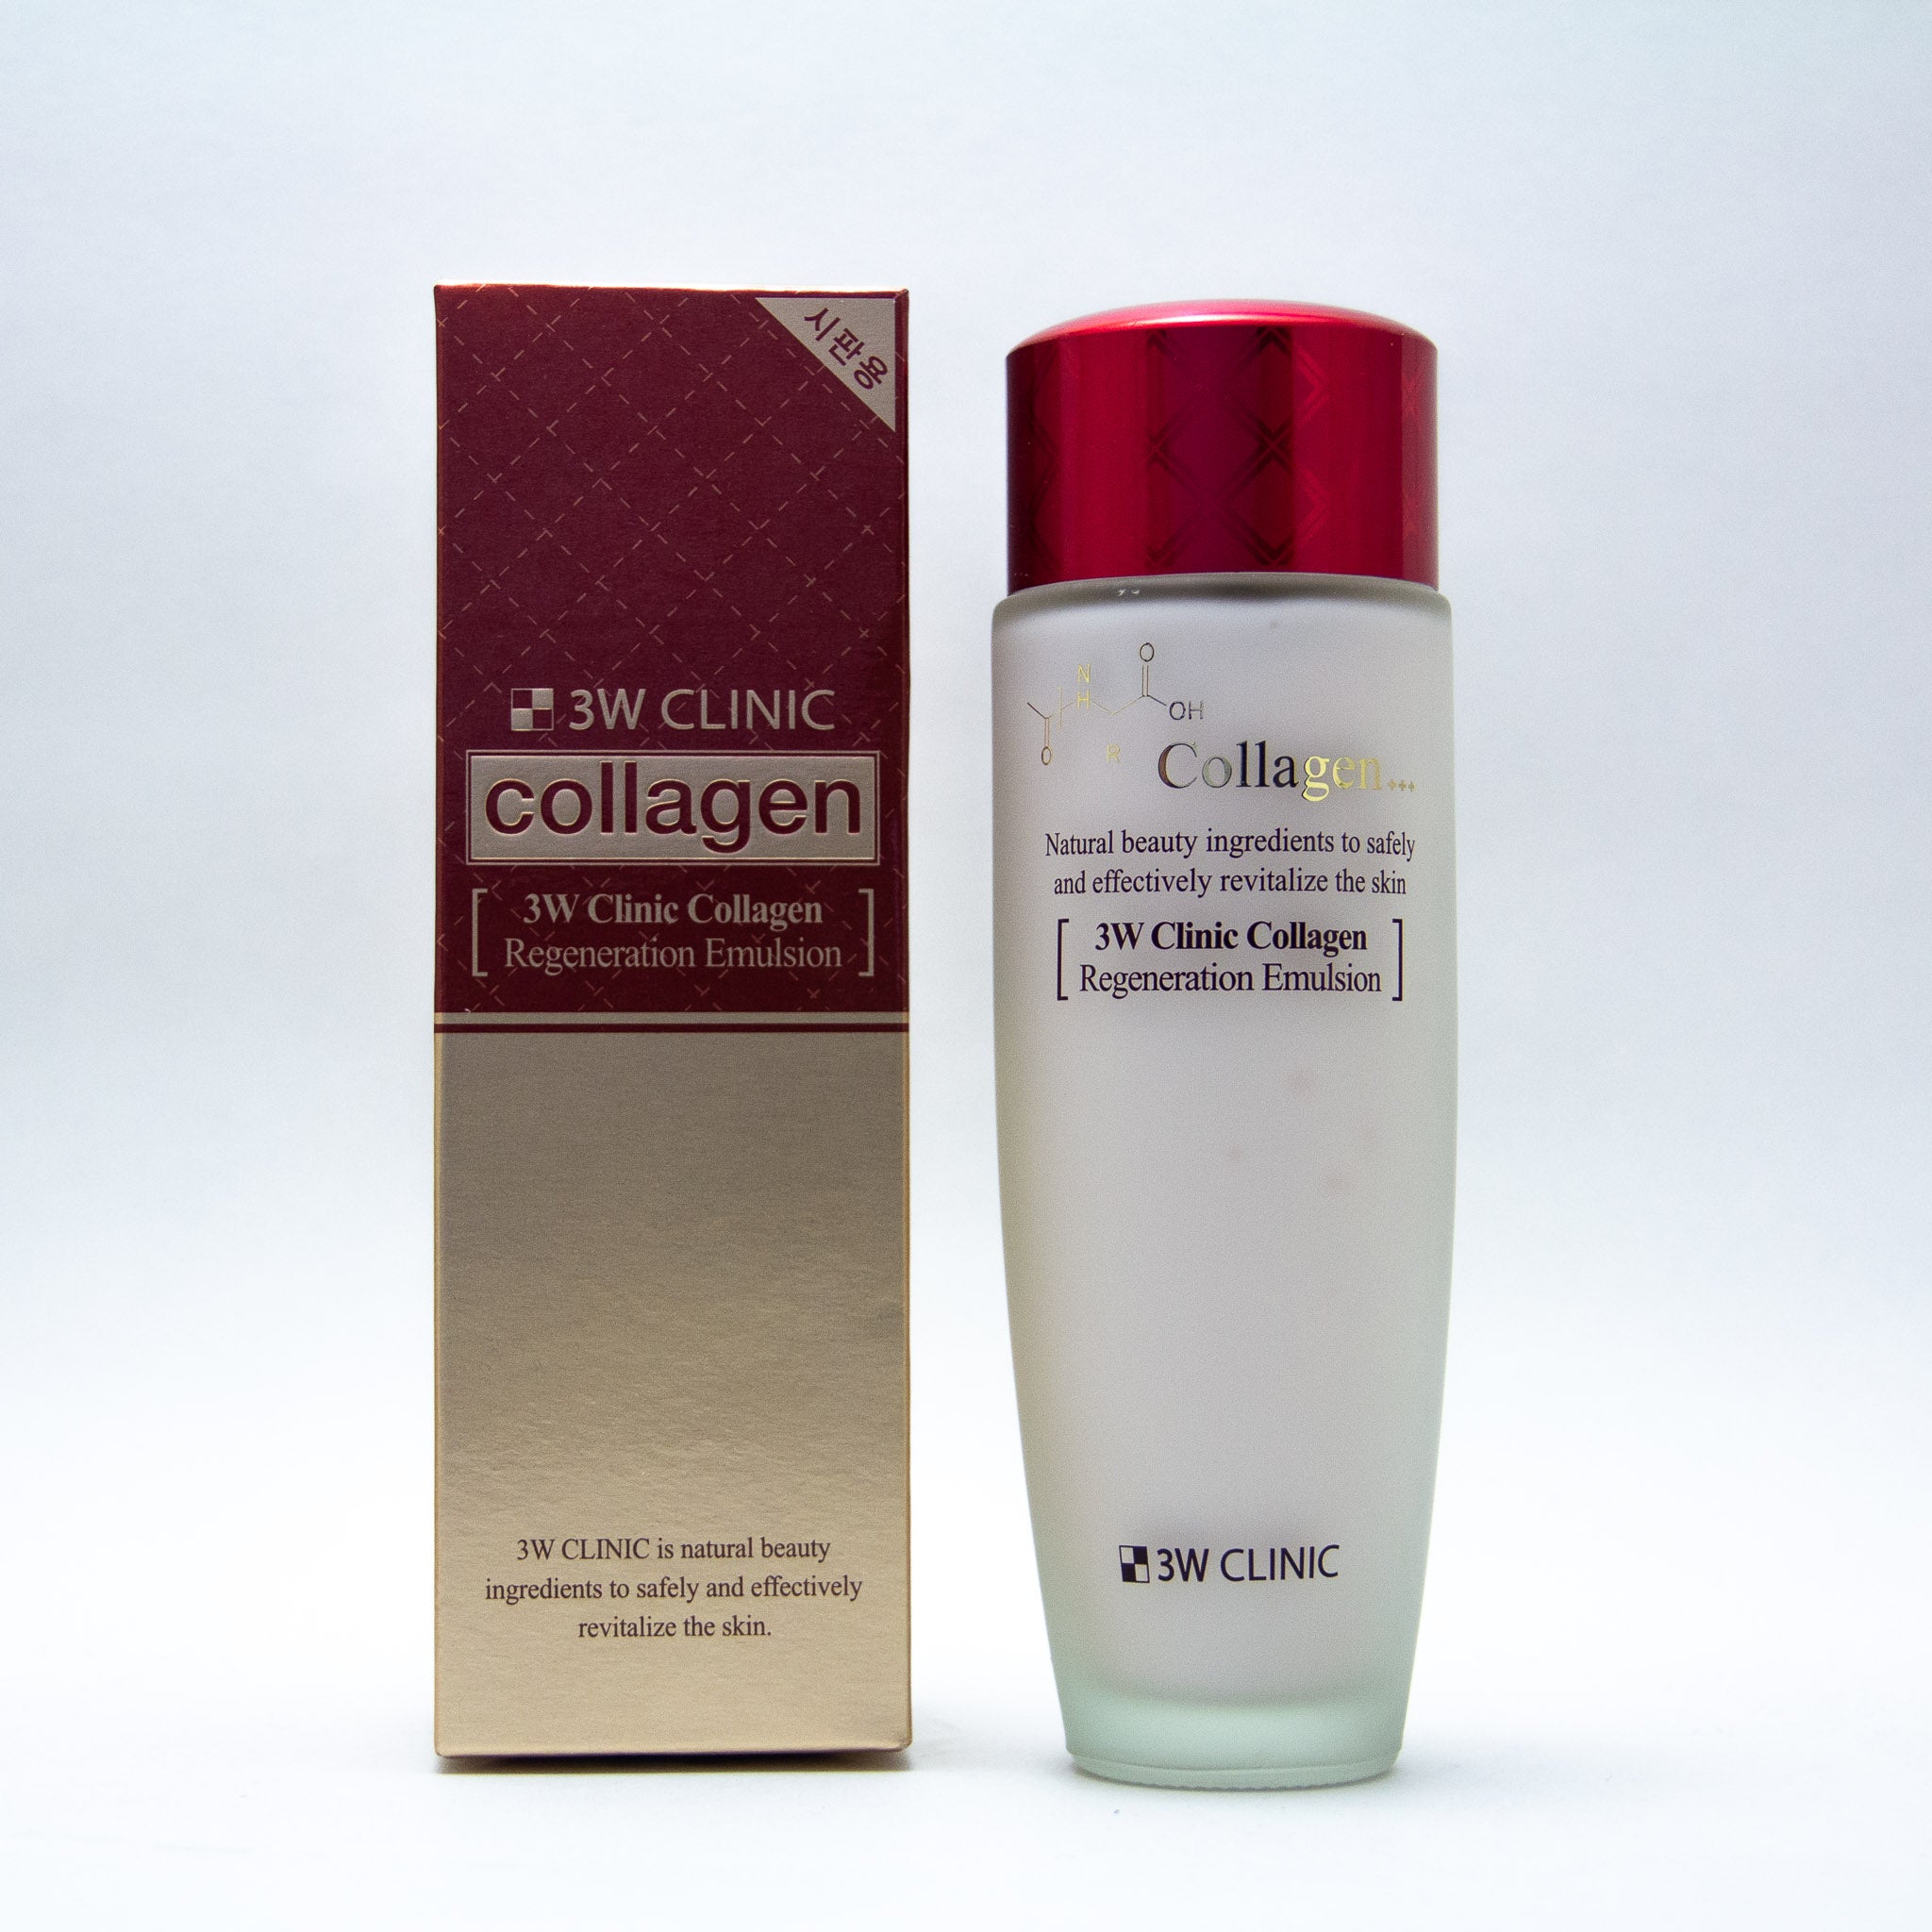 3W Clinic Collagen Regeneration Emulsion, 150 ml: This moisturizing milk with marine collagen and other natural ingredients locks in the moisture and balances your skin's oil and water levels. This light weight moisturizer actively combats surface dehydration while smoothing the skin's surface.